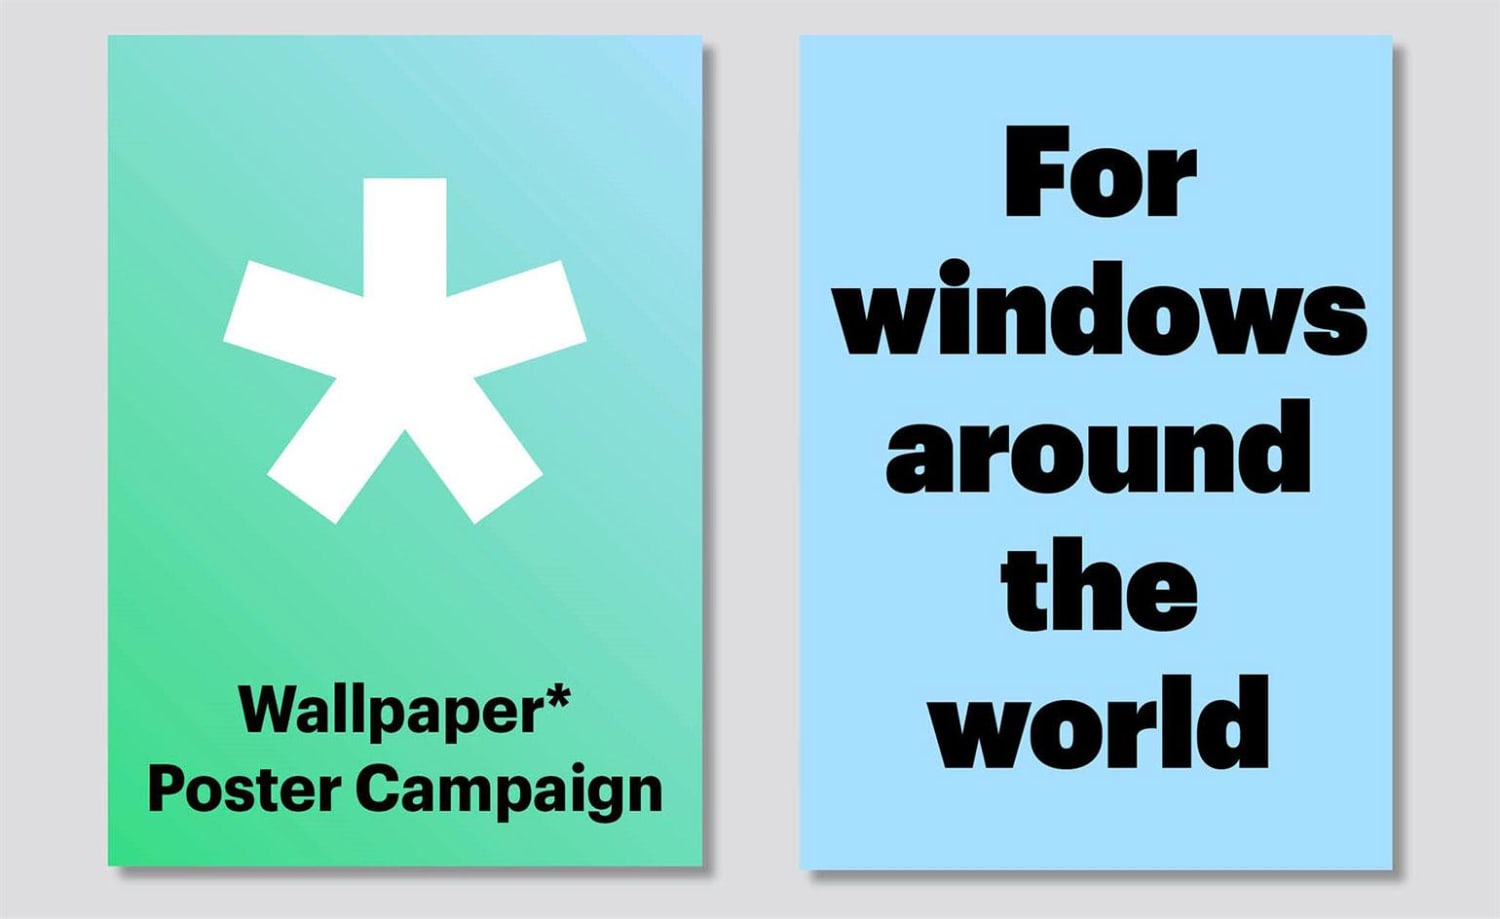 How to contribute to the Wallpaper* Poster Campaign